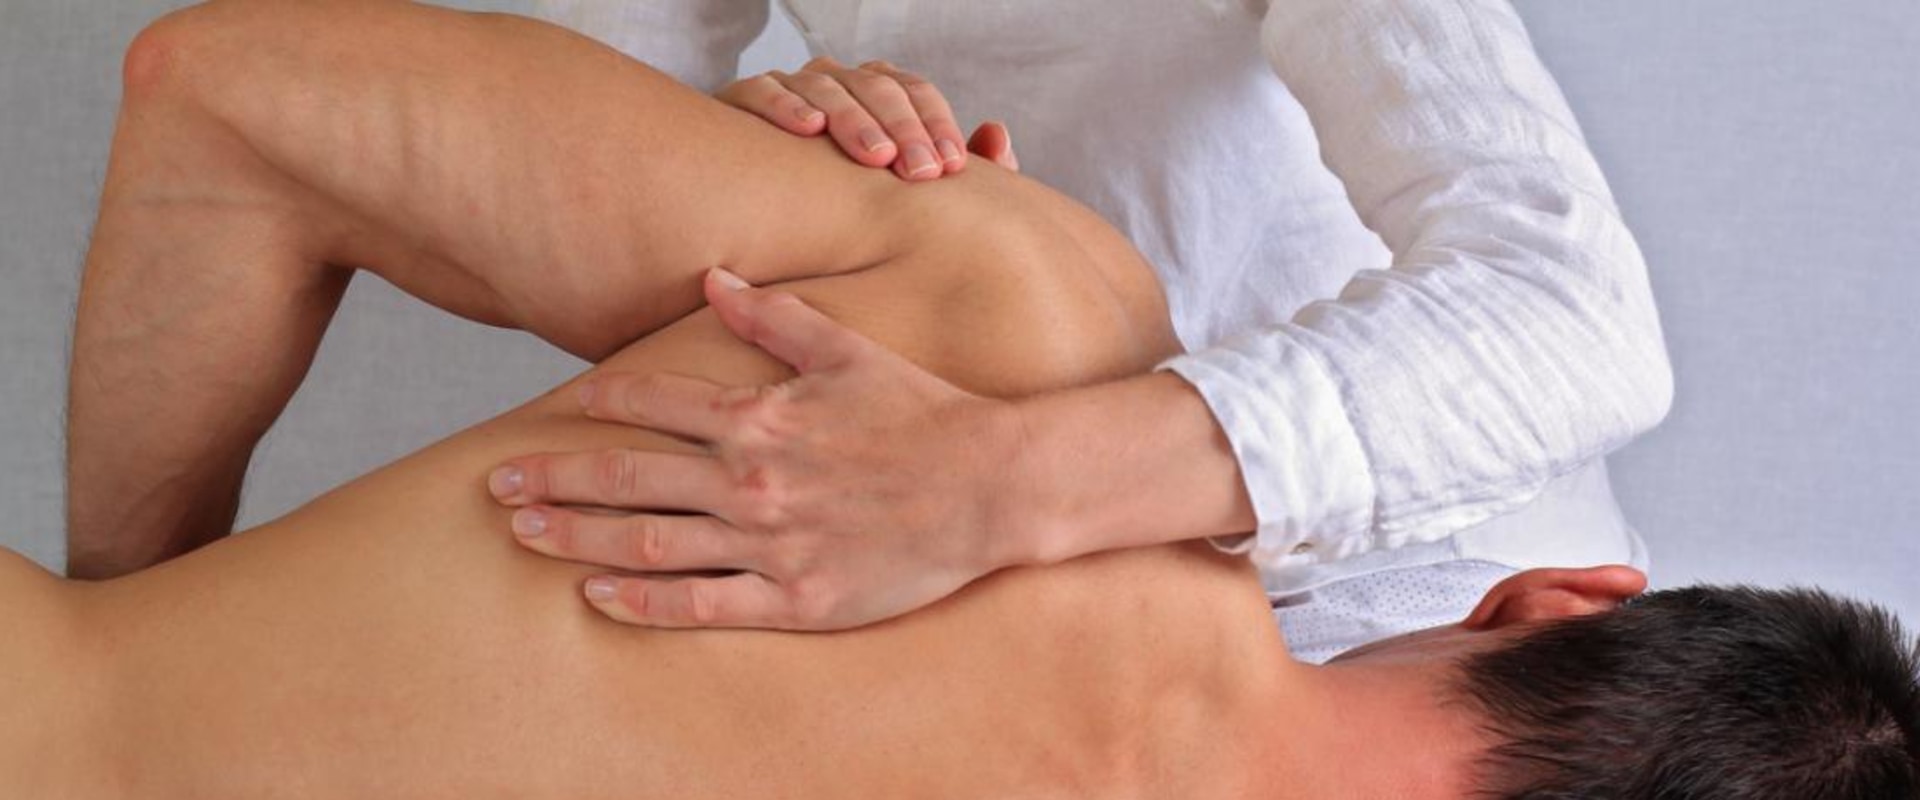 Is osteopathic manipulation dangerous?